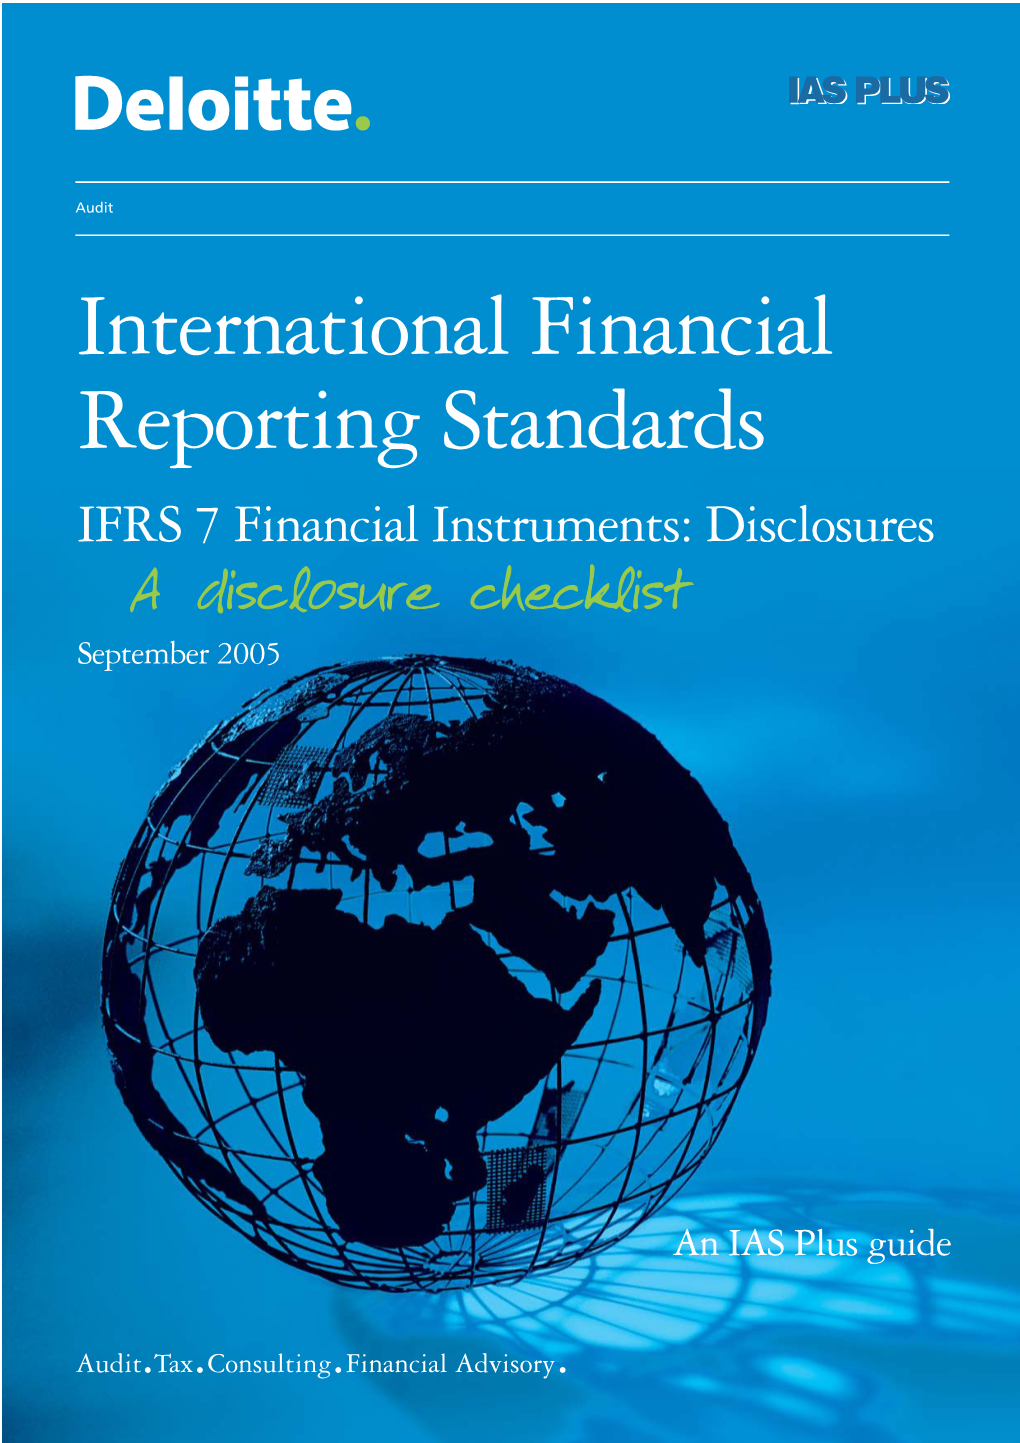 IFRS 7 Financial Instruments: Disclosures a Disclosure Checklist September 2005